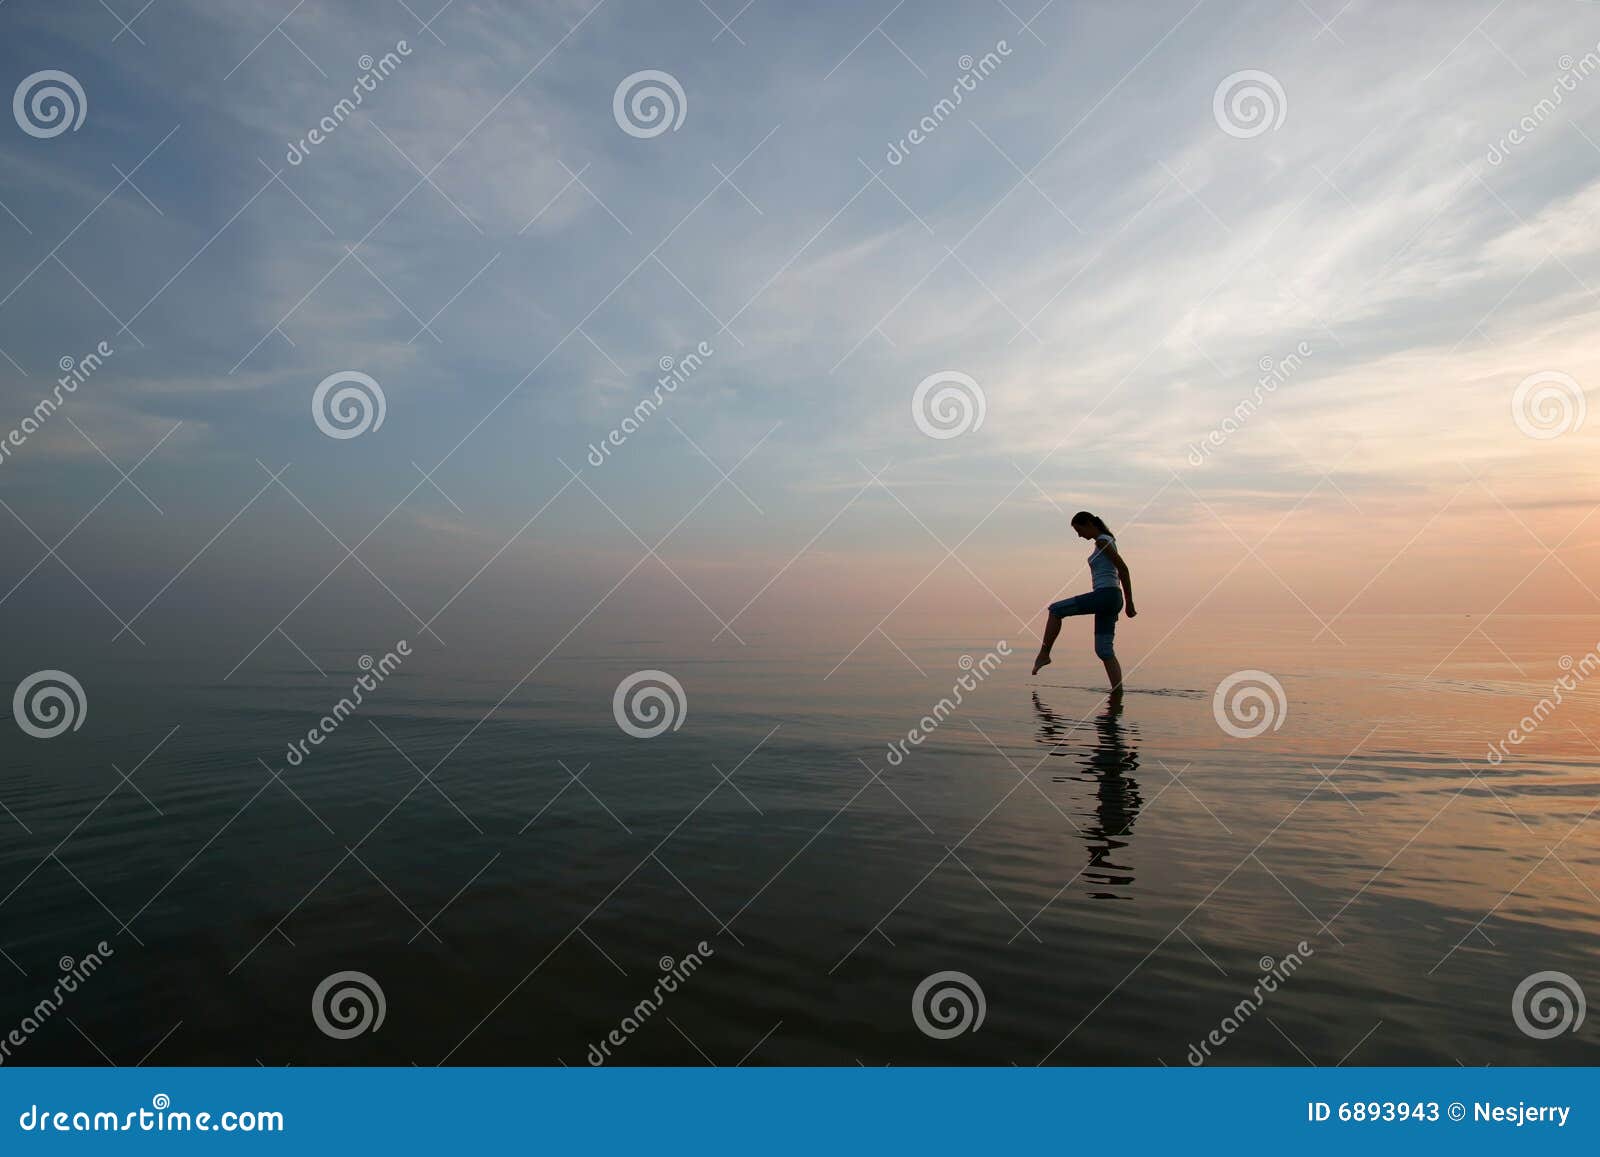 silhouette of young woman wading in sea